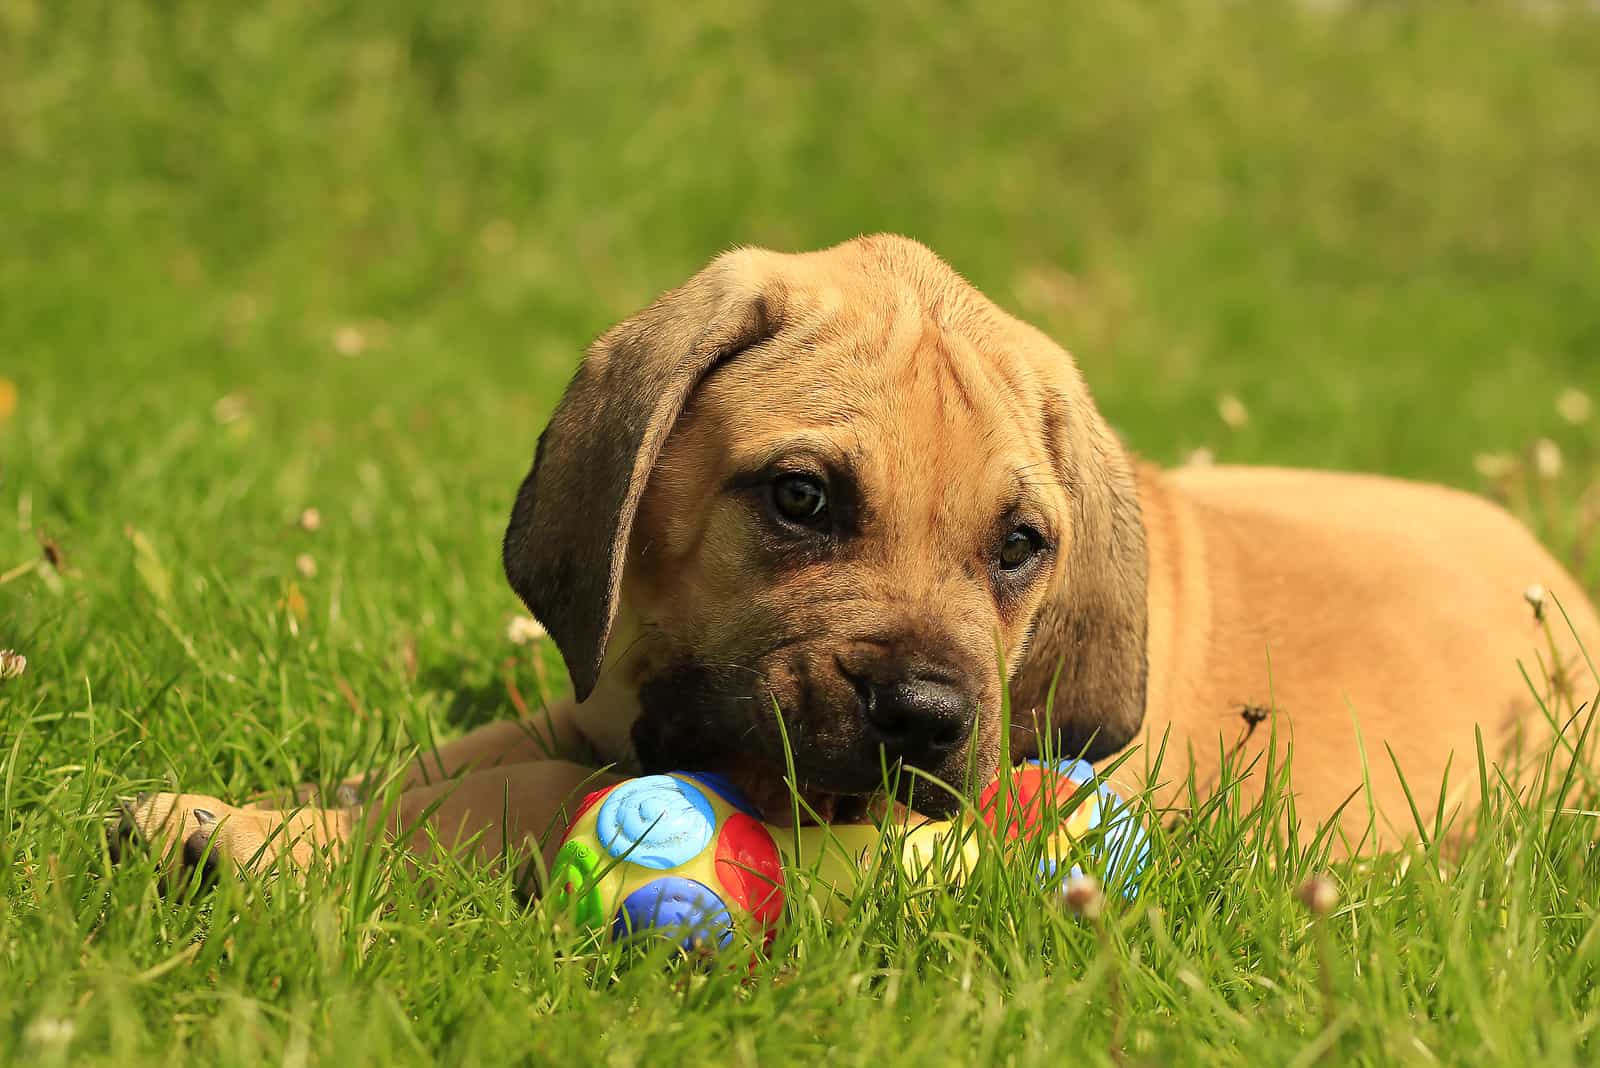 Boerboel puppy playing with ball in the grass